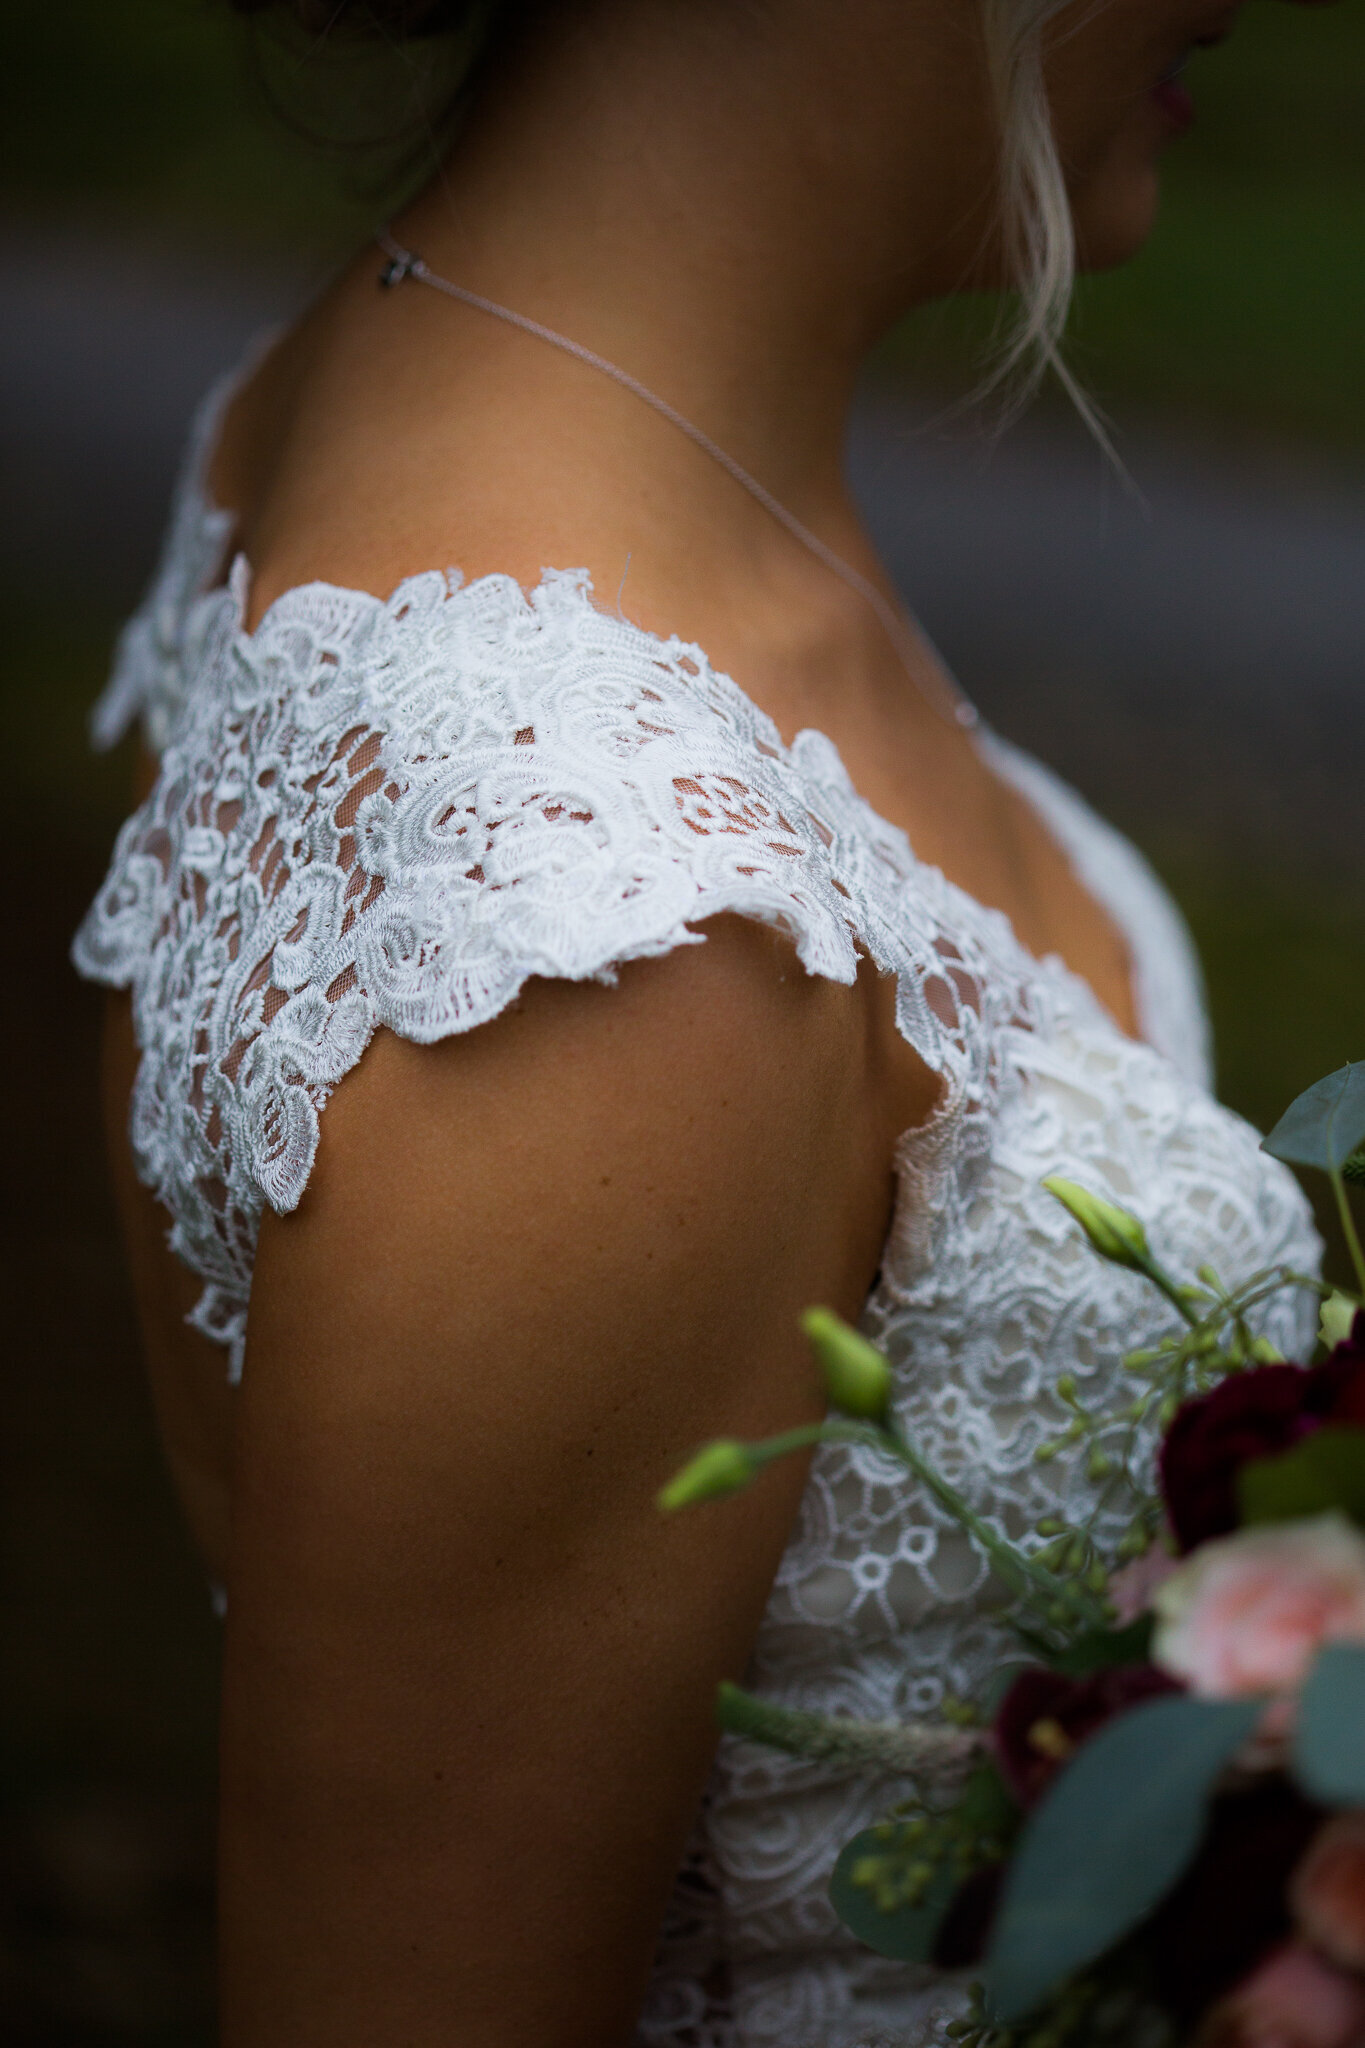 Bridal dress details and wedding bouquet at Hockley Valley.